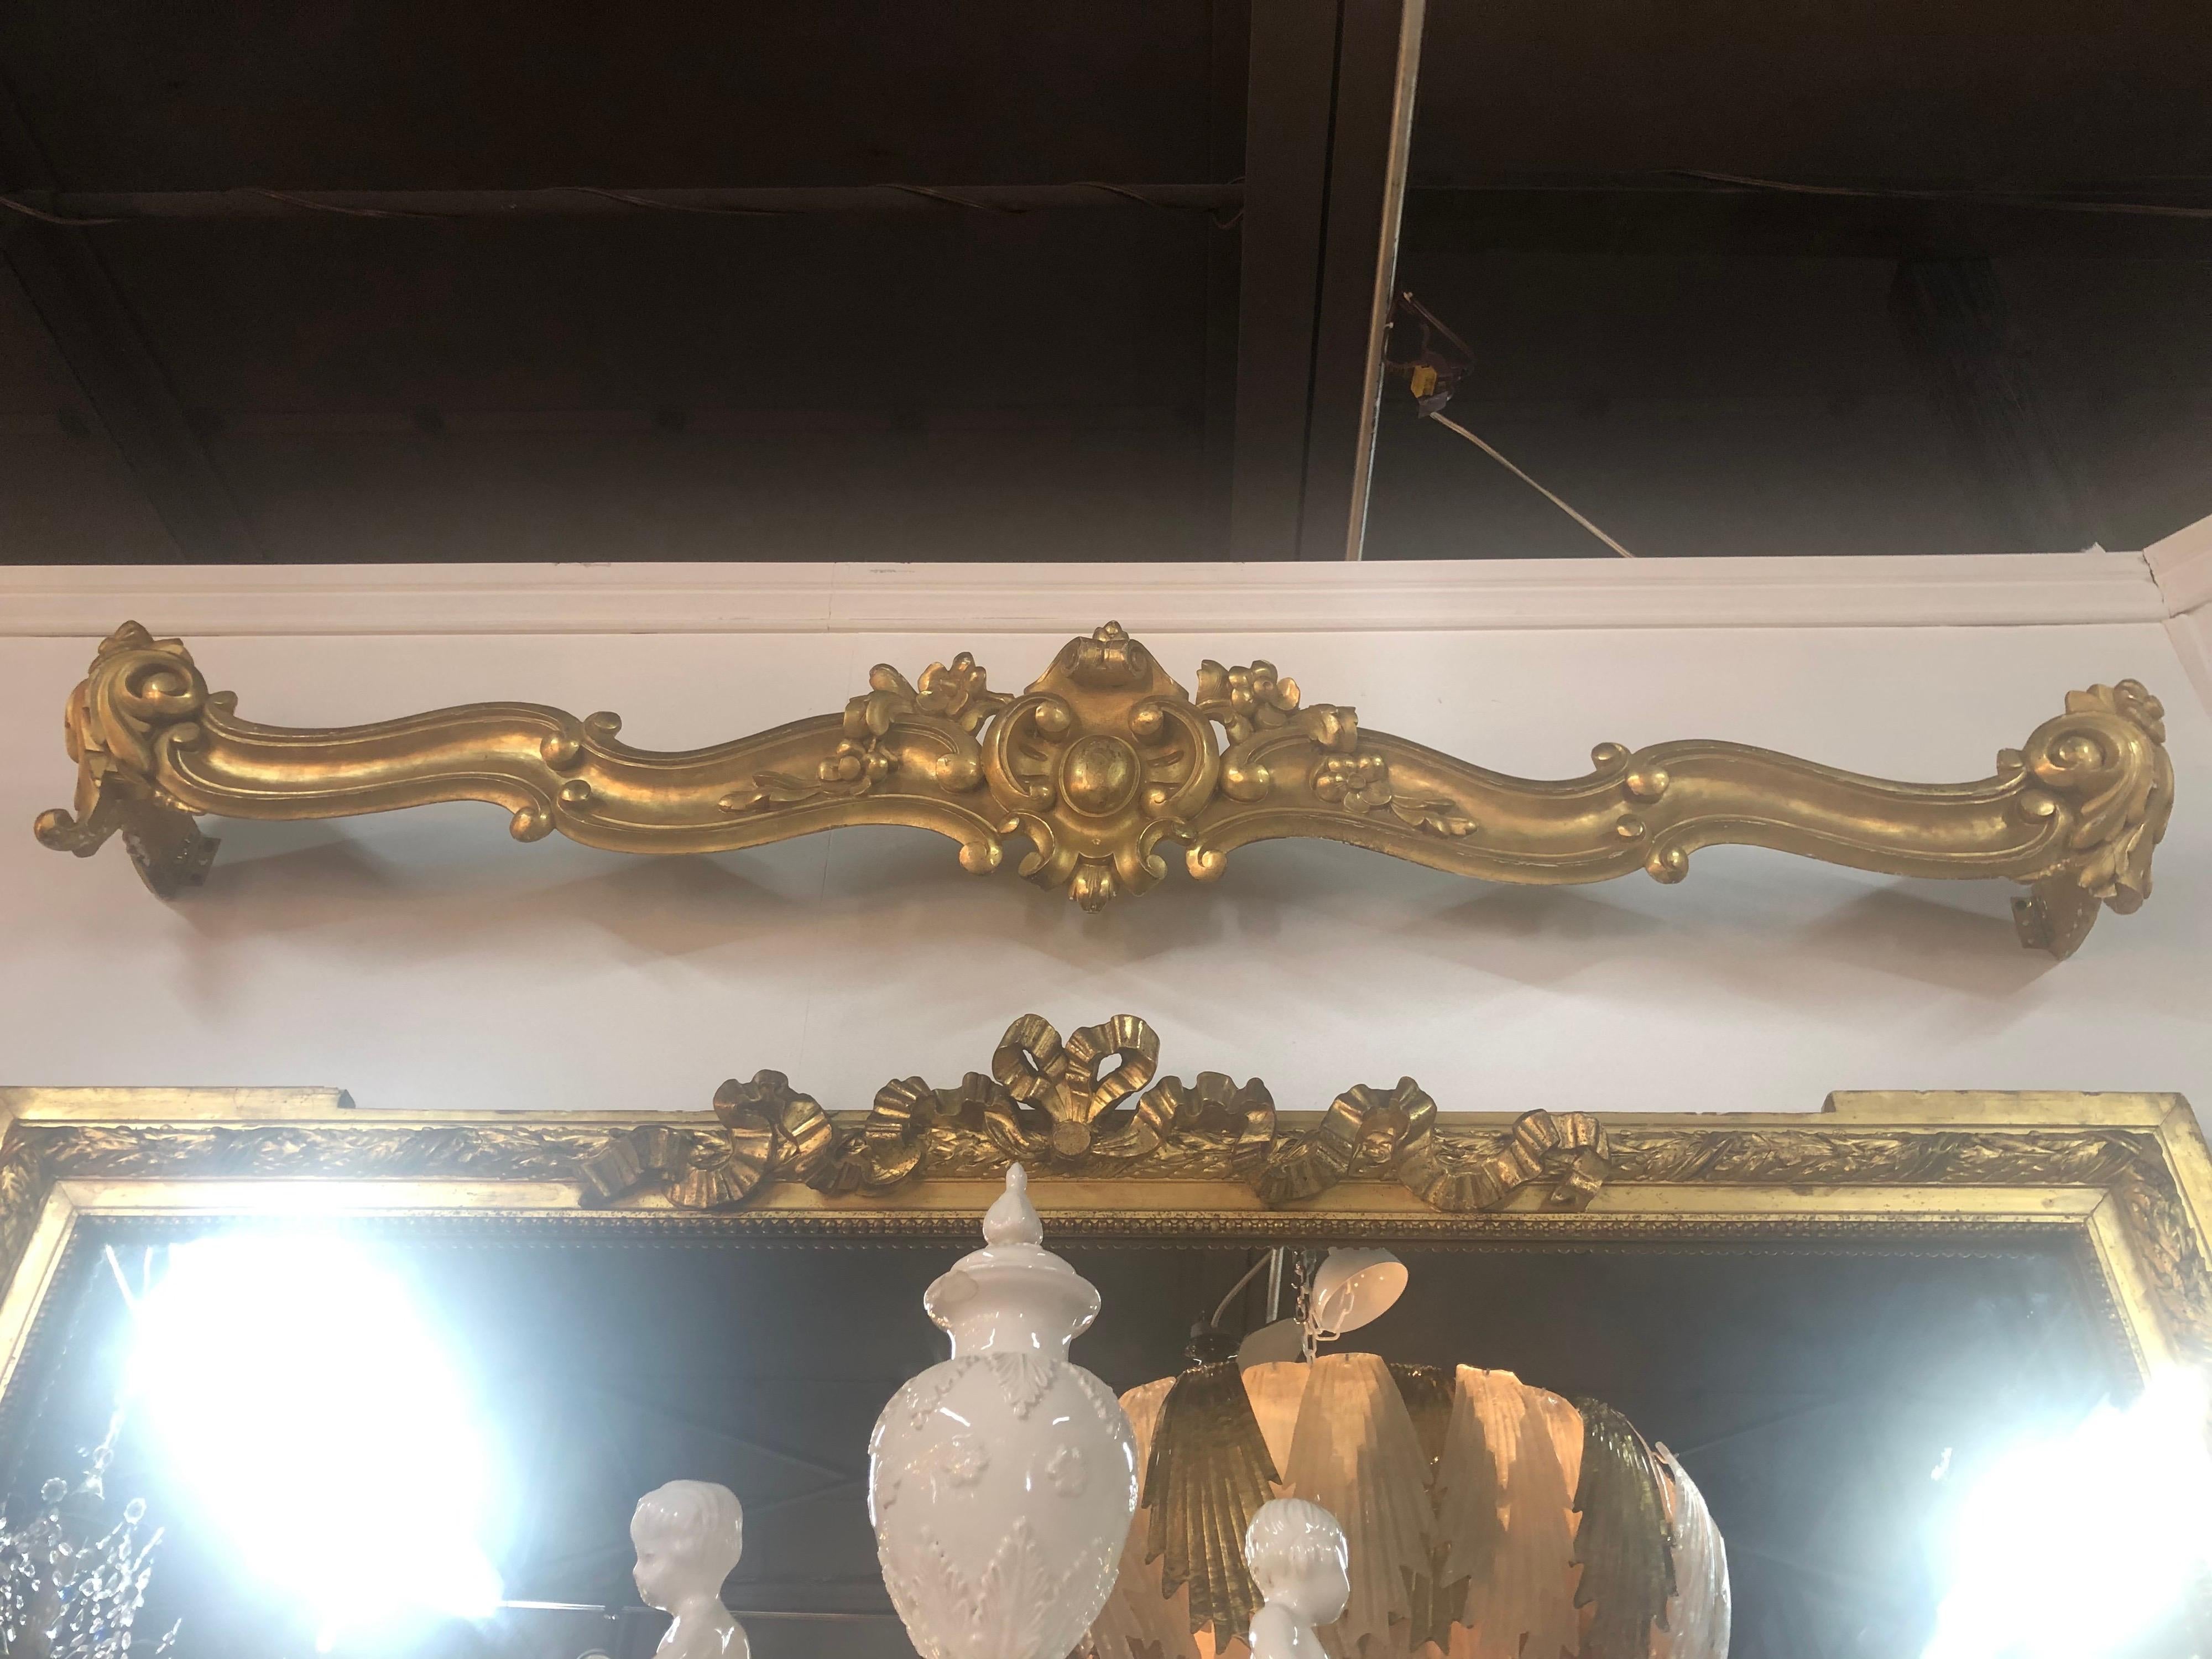 Decorative pair of 19th century carved and giltwood window valances. Make a stylish statement!